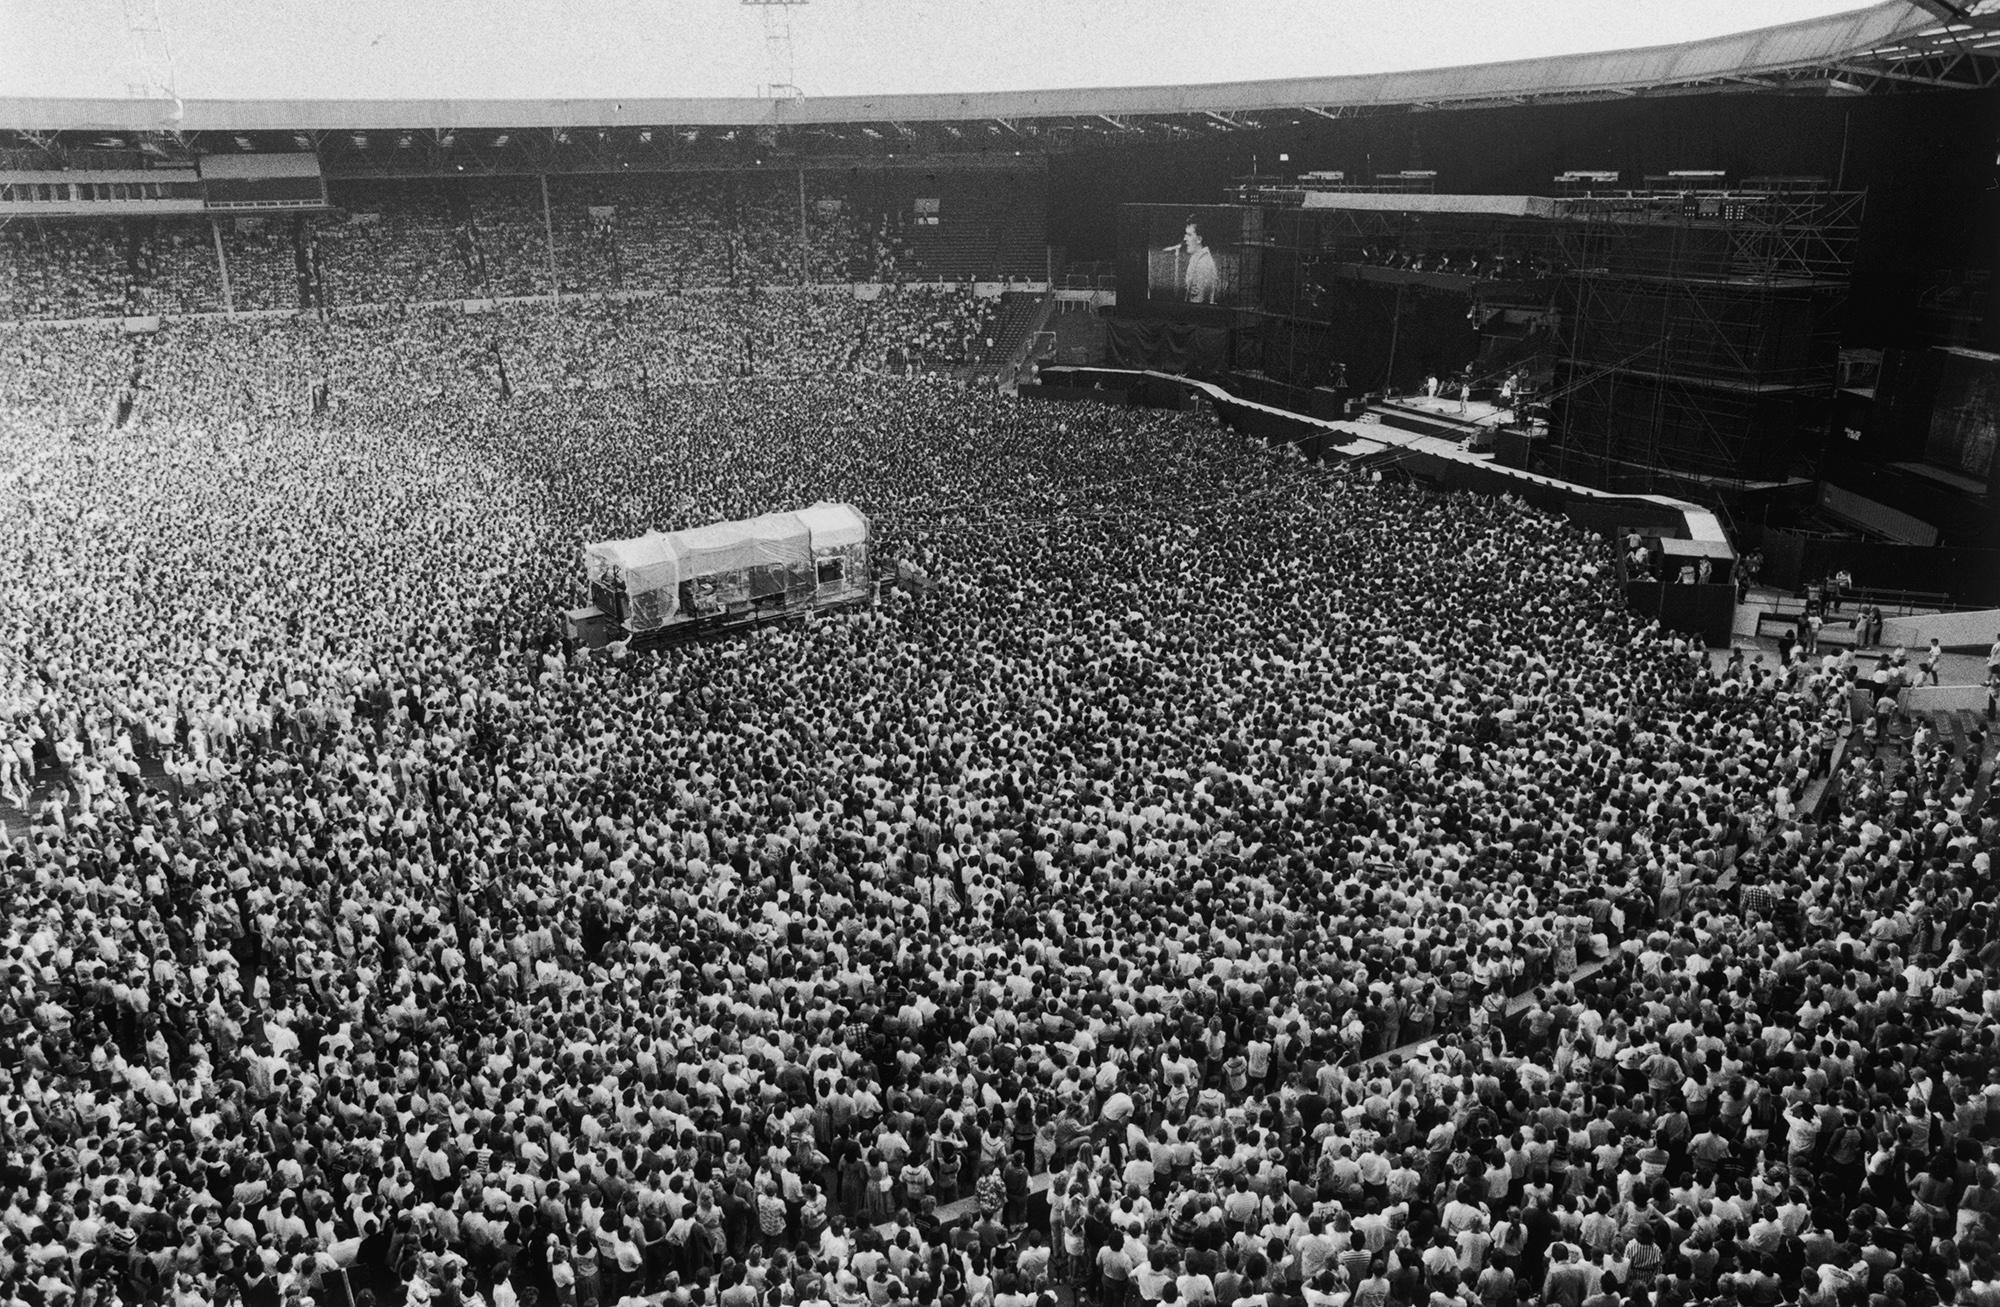 Bruce Springsteen Crowd from Rock fine art photography